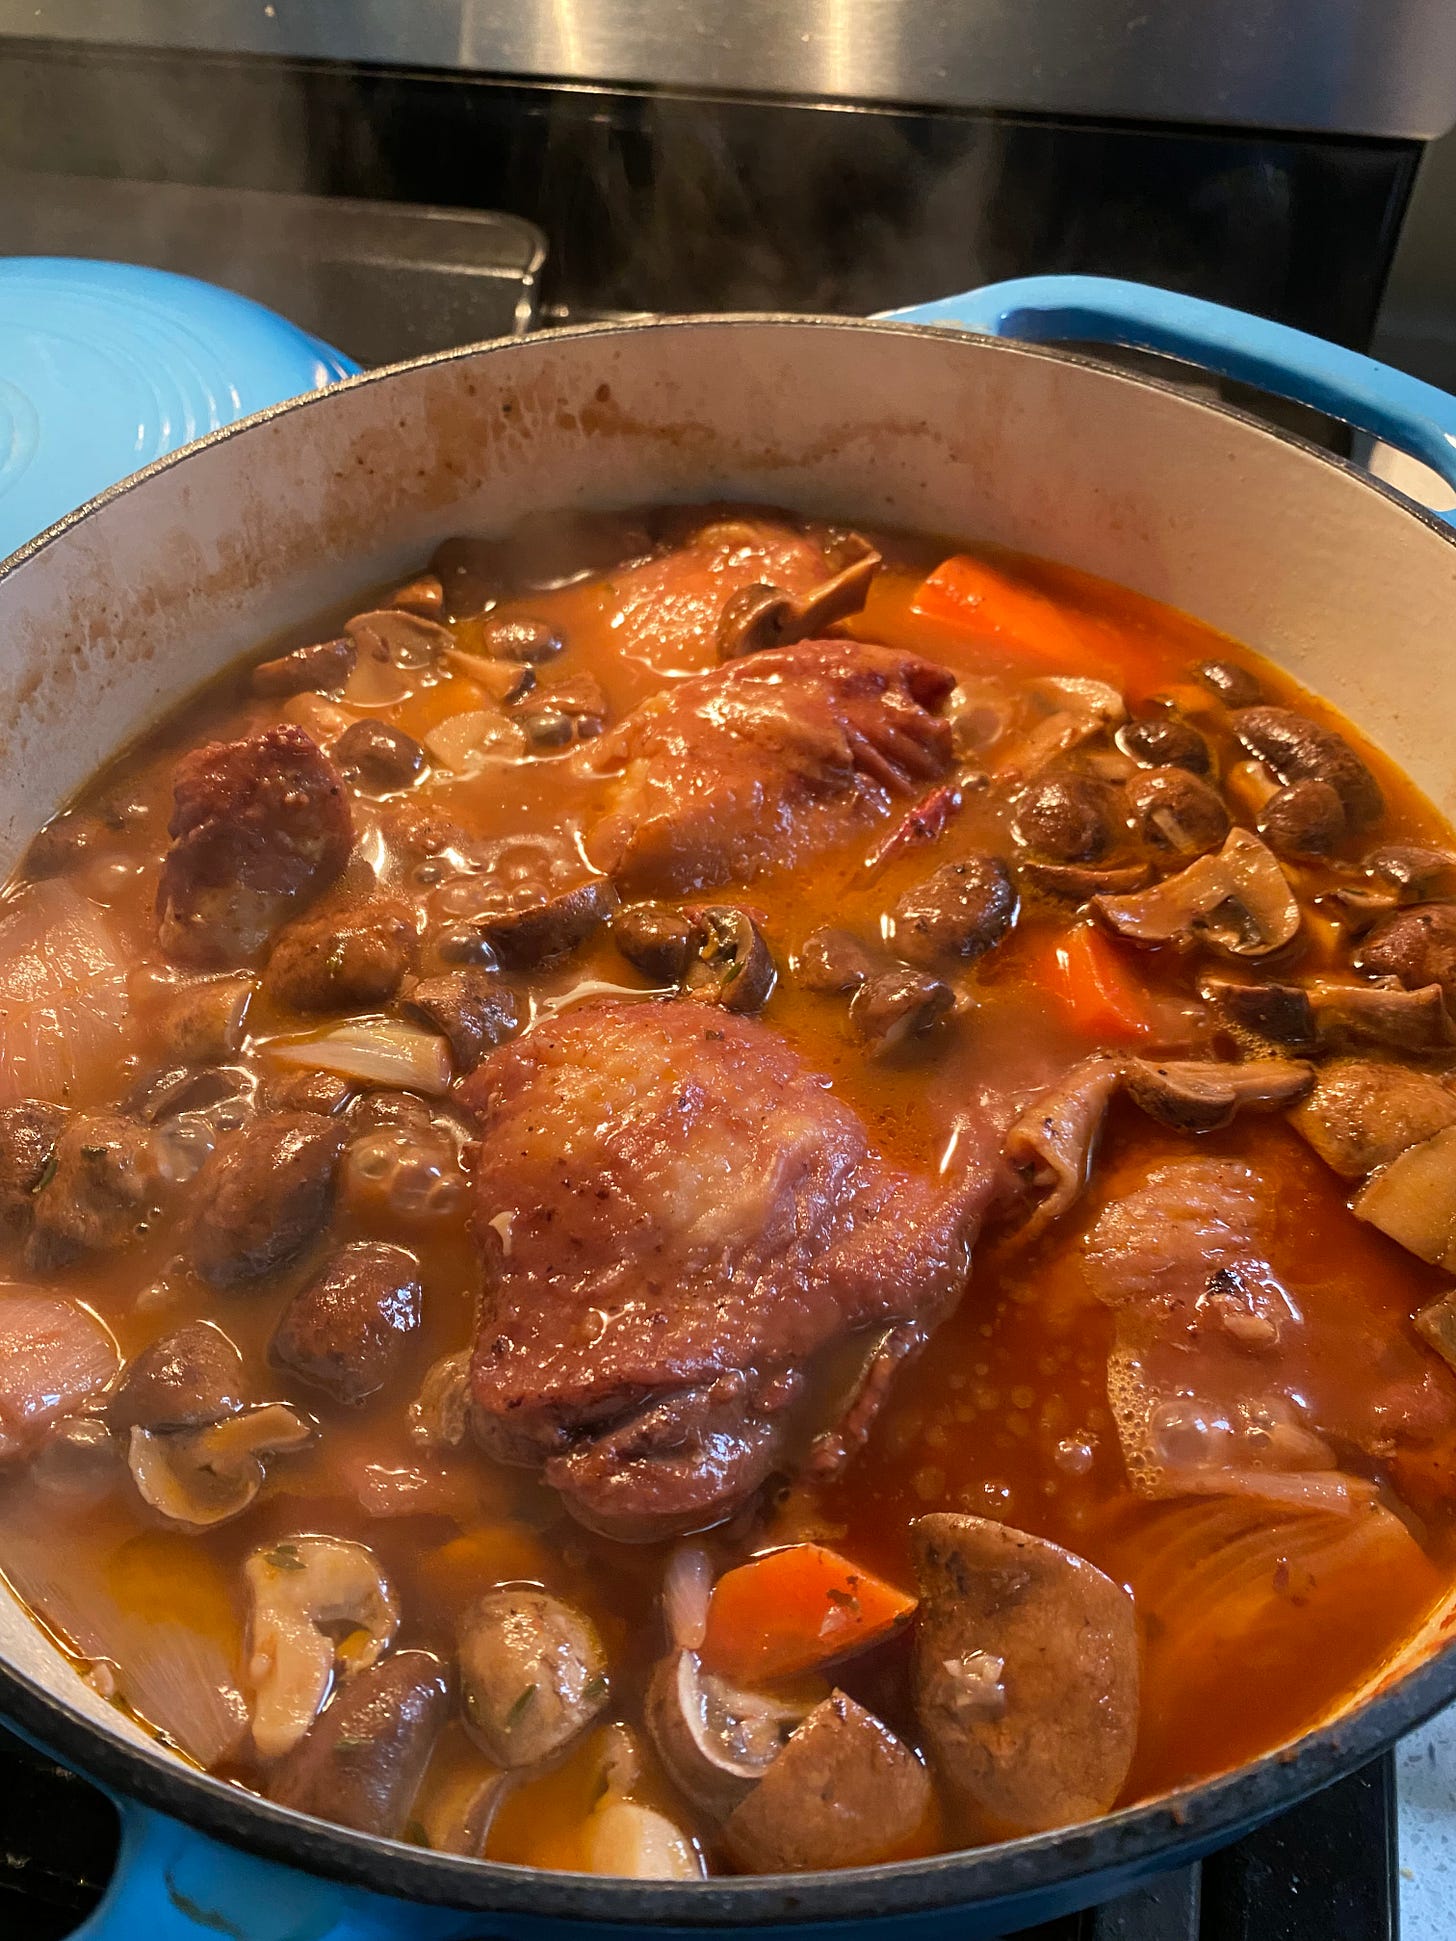 Picture of coq au vin cooking in a Dutch oven.